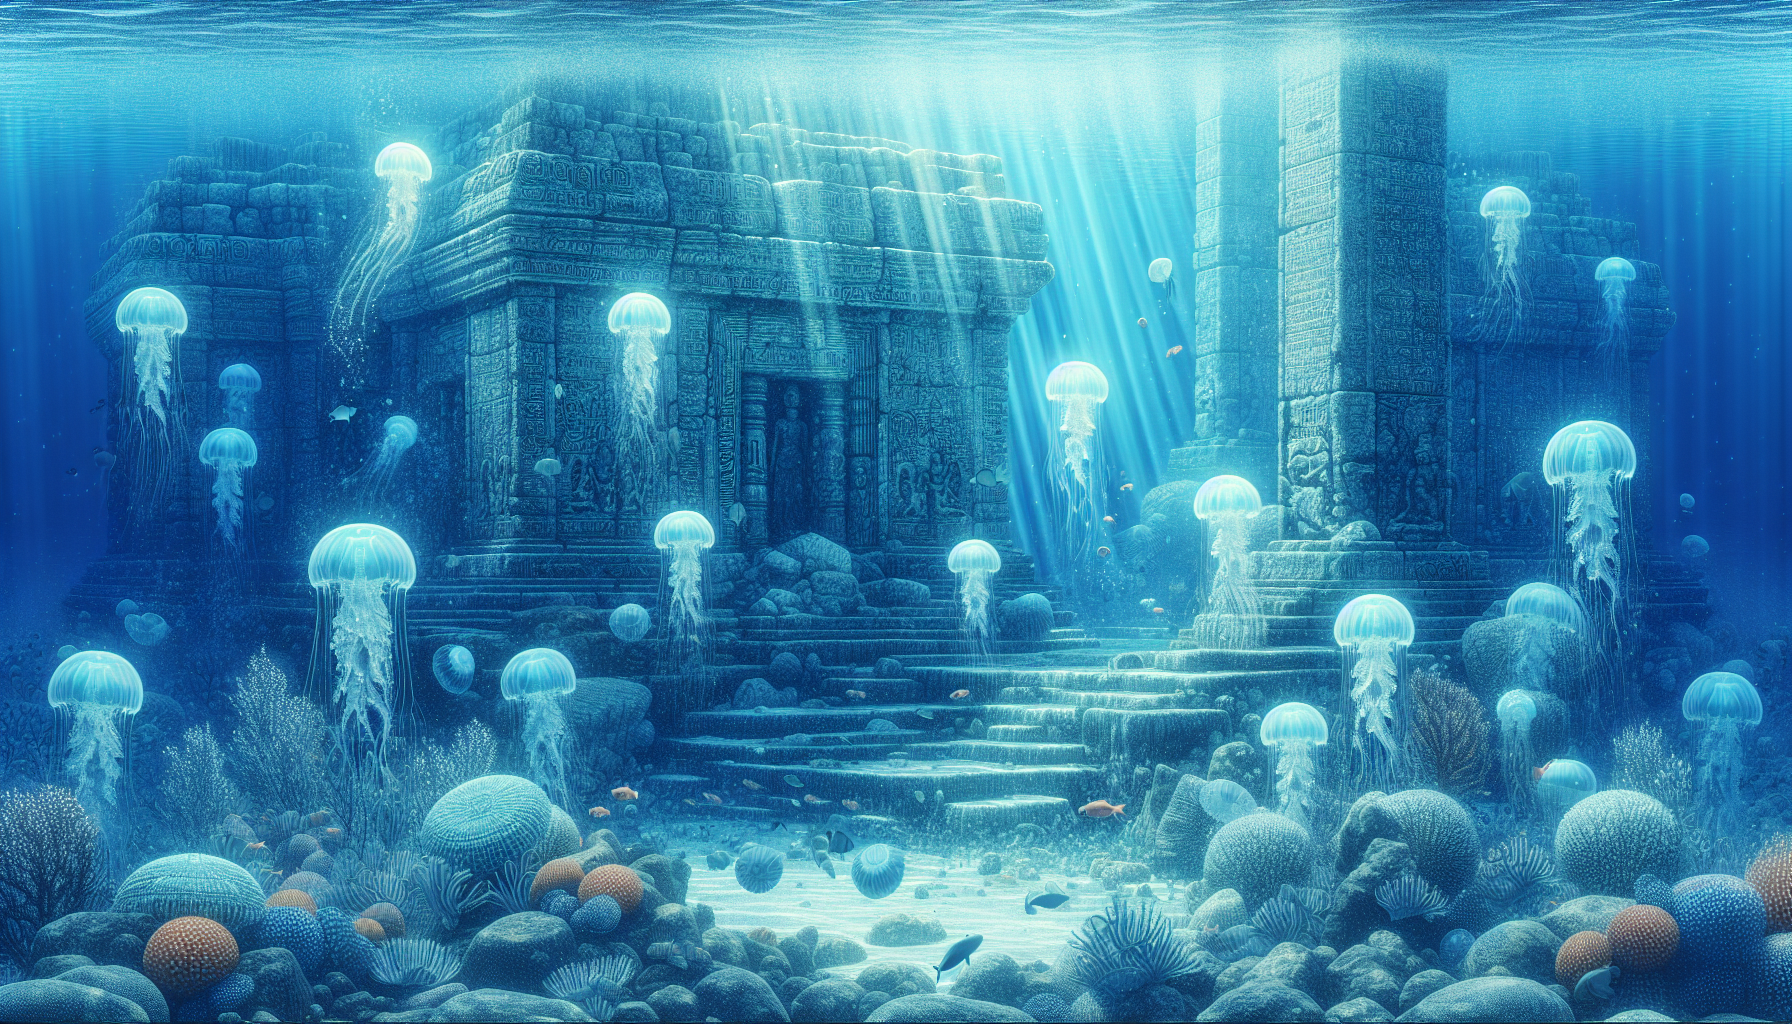 A tranquil underwater scene with translucent jellyfish floating around ancient submerged temple ruins, rays of sunlight piercing through the water, highlighting intricate carvings and scriptures relat